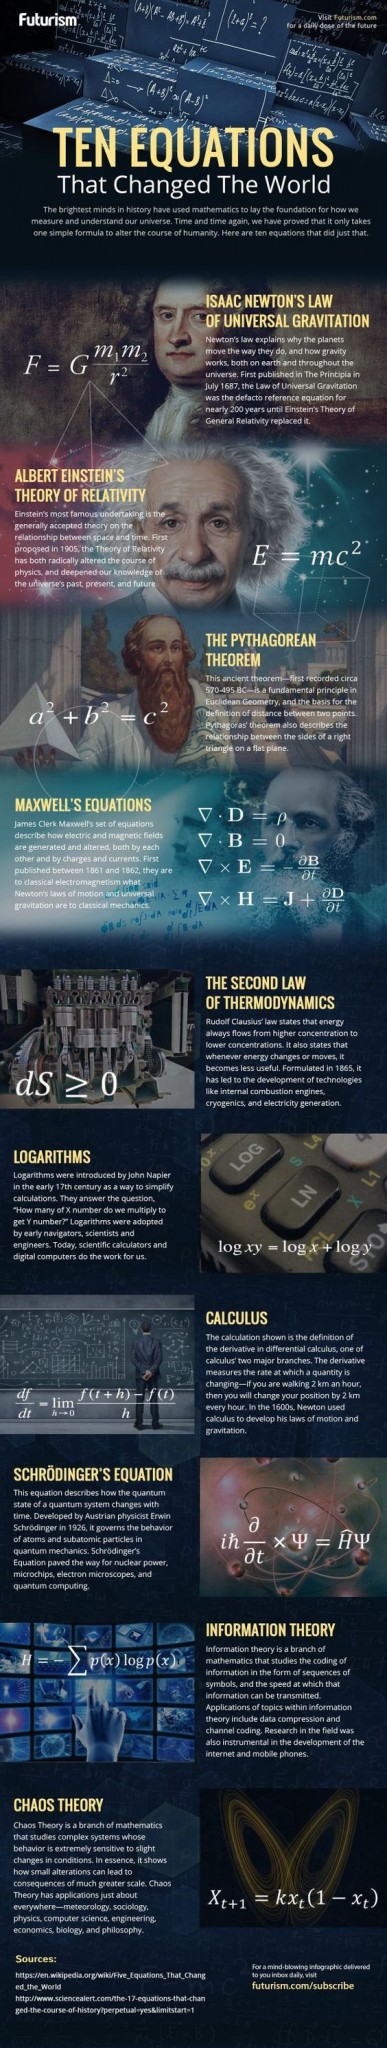 10 equations that changed the world